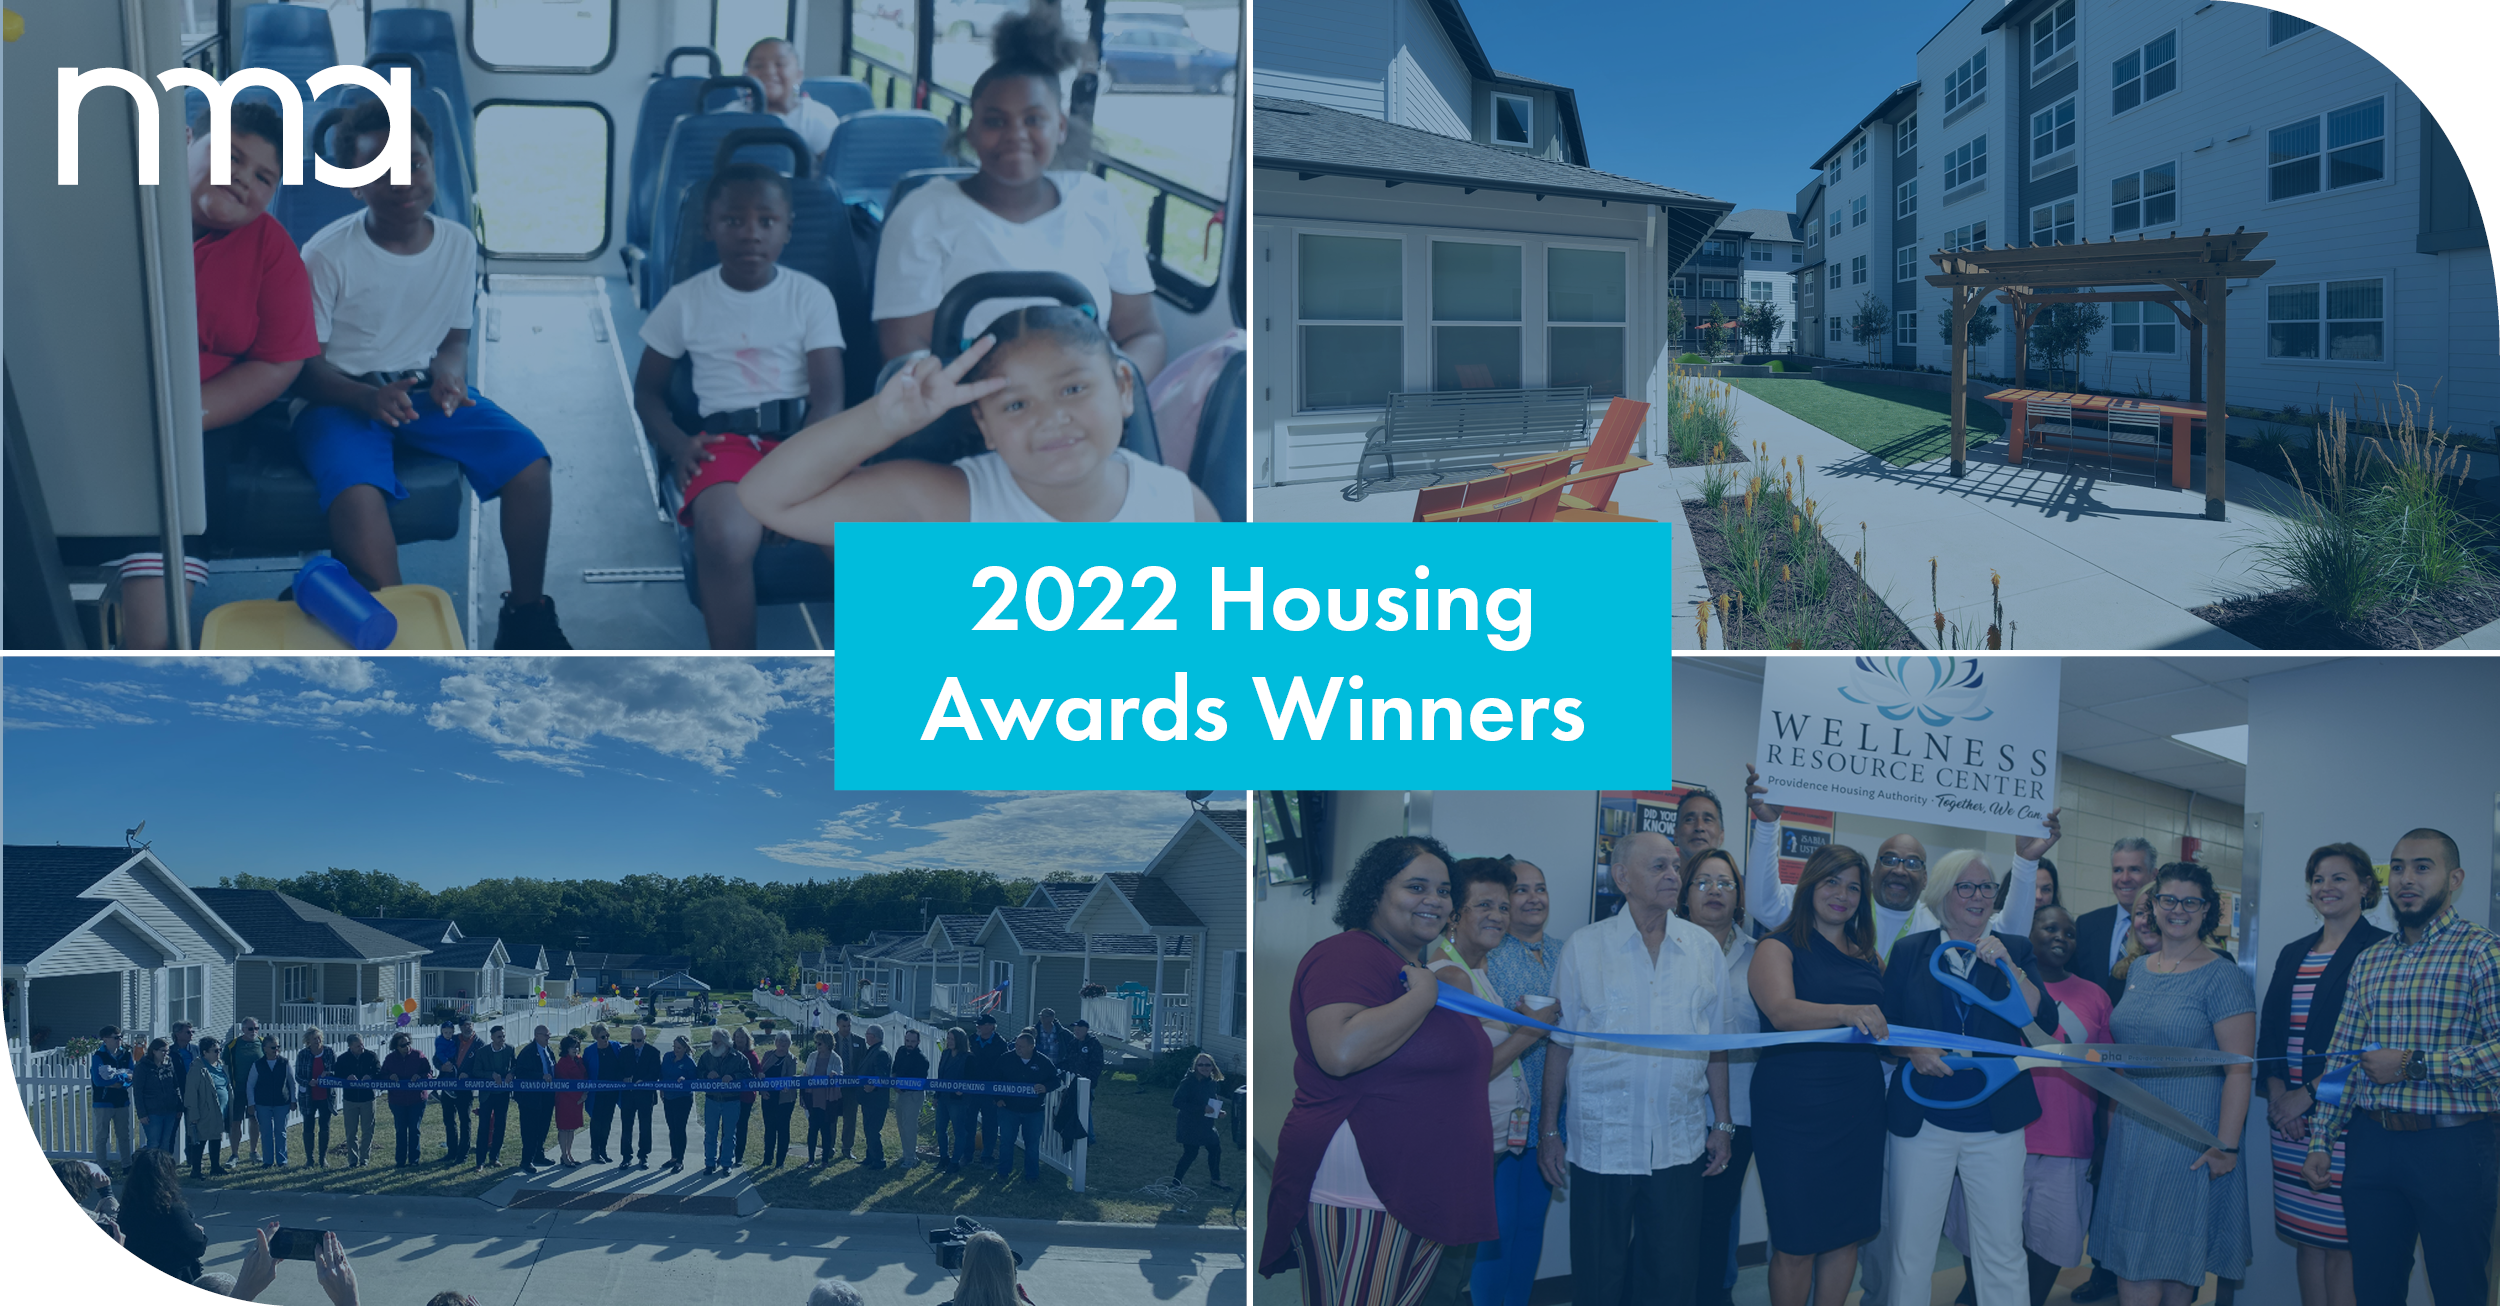 2022 Housing Awards Winners: Four images depicting children smiling and posing on a bus; the outside of a four-story, white and gray apartment building; a ribbon-cutting ceremony in front of a small neighborhood of ten houses with lawns; and a ribbon-cutting ceremony inside a building, with the Wellness Resource Center logo displayed.